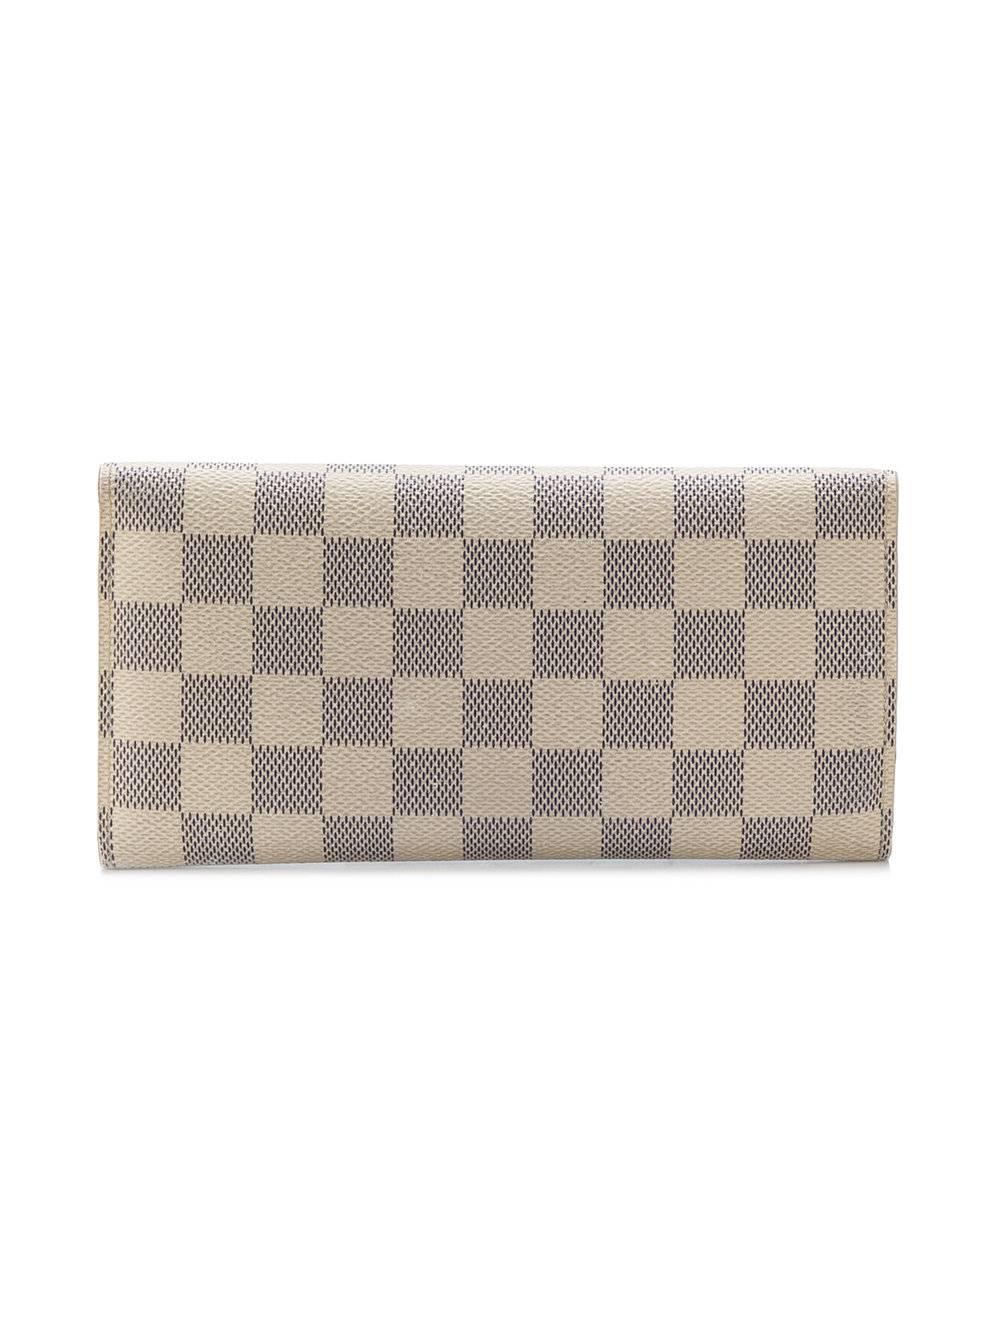 Fashioned in Damier Azur canvas, this stylish yet spacious wallet by Louis Vuitton features an envelope design, a foldover top with snap closure, a calf-leather lining, an interior zipped compartment, multiple interior card slots and an internal